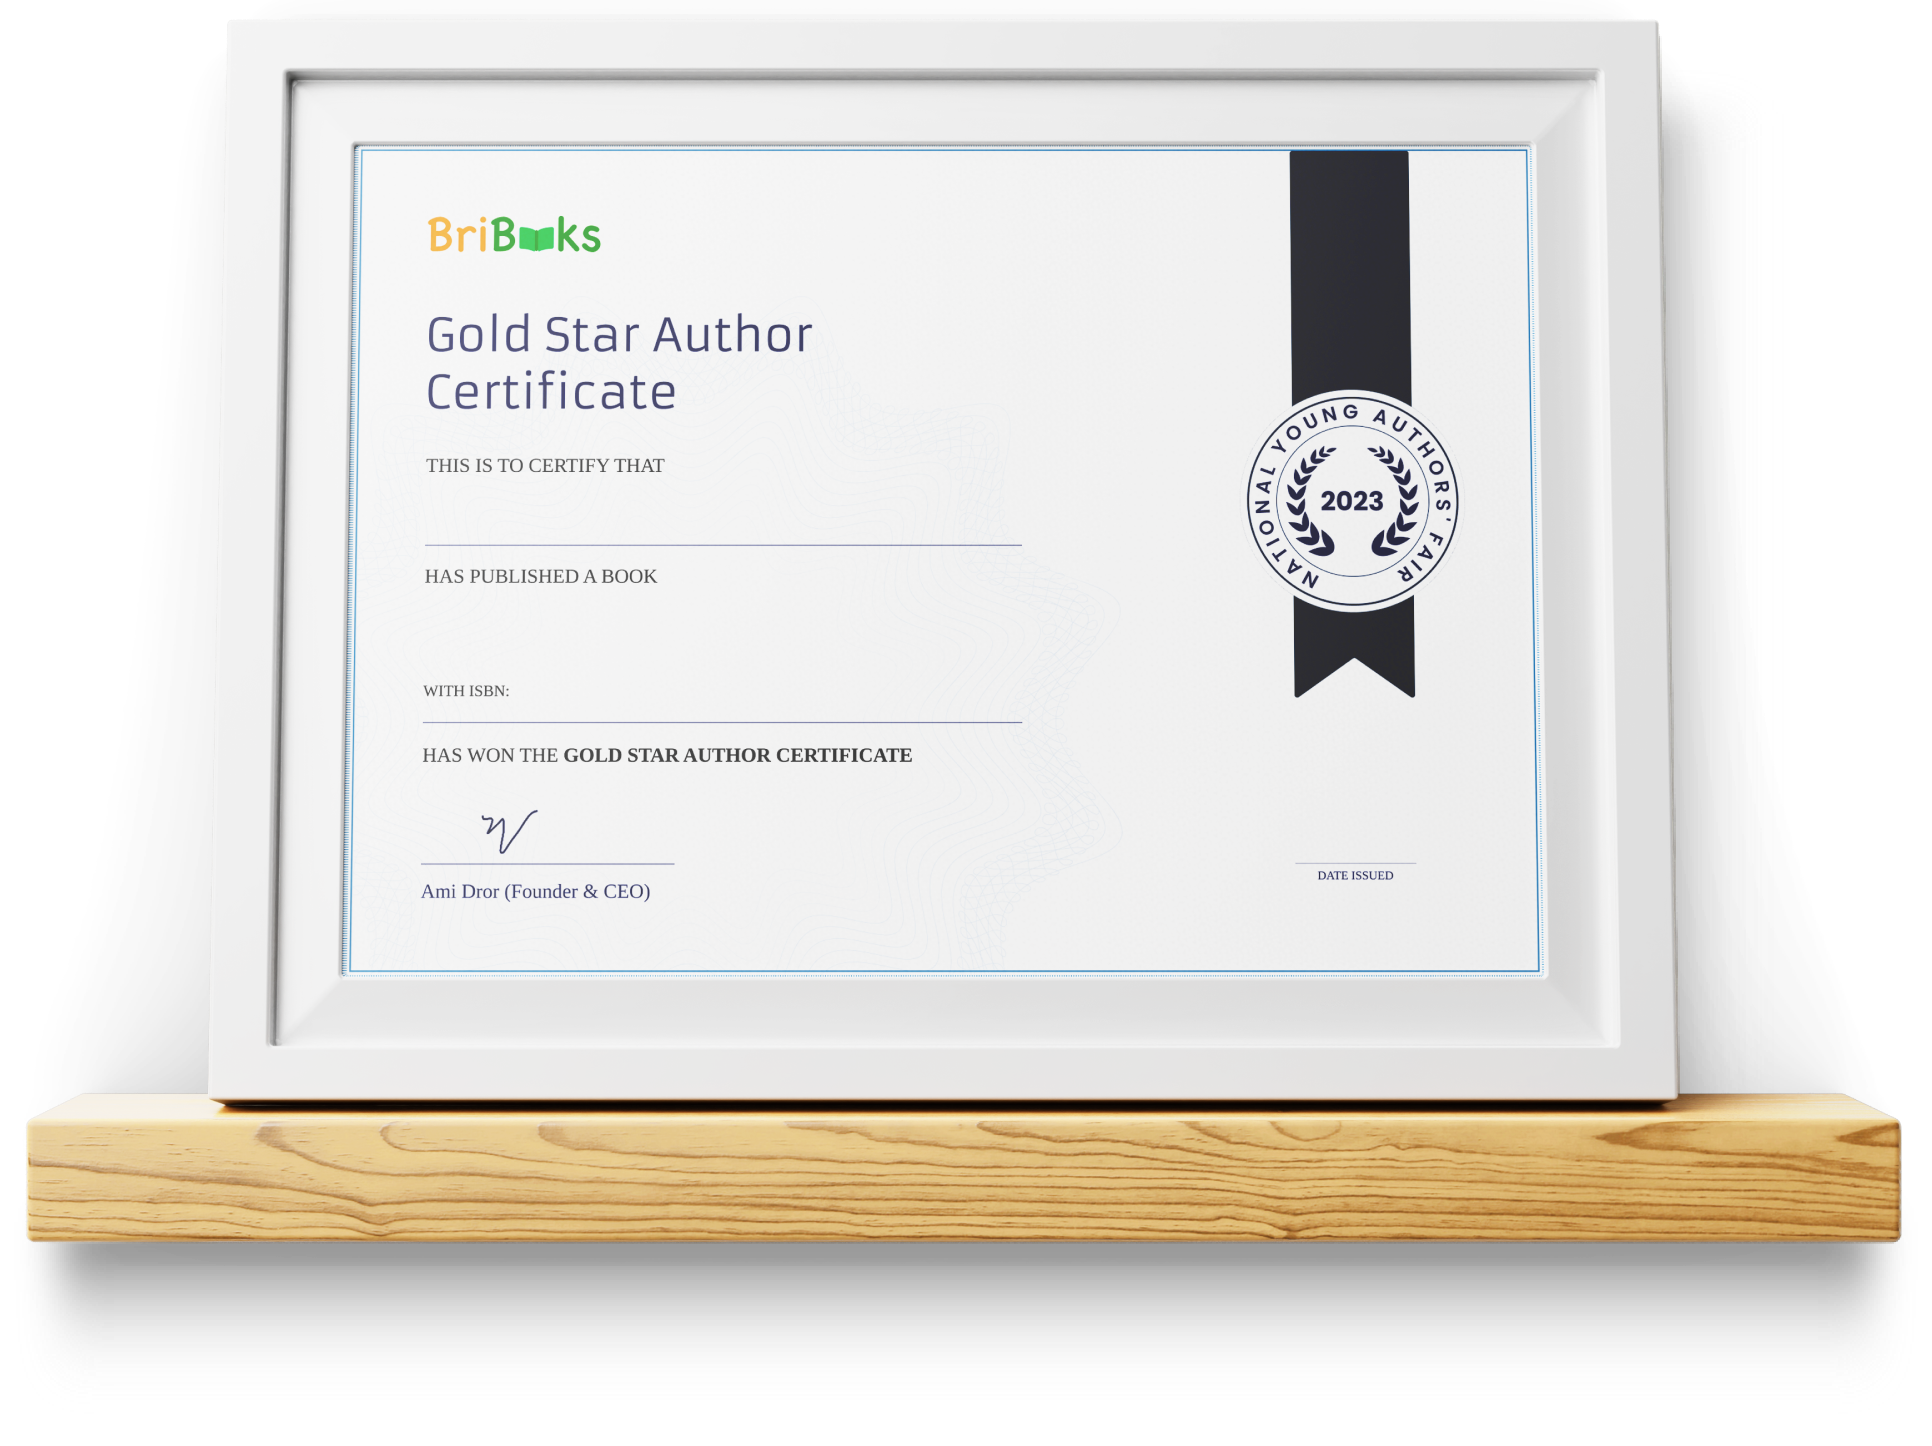 Gold Star Author Certificate